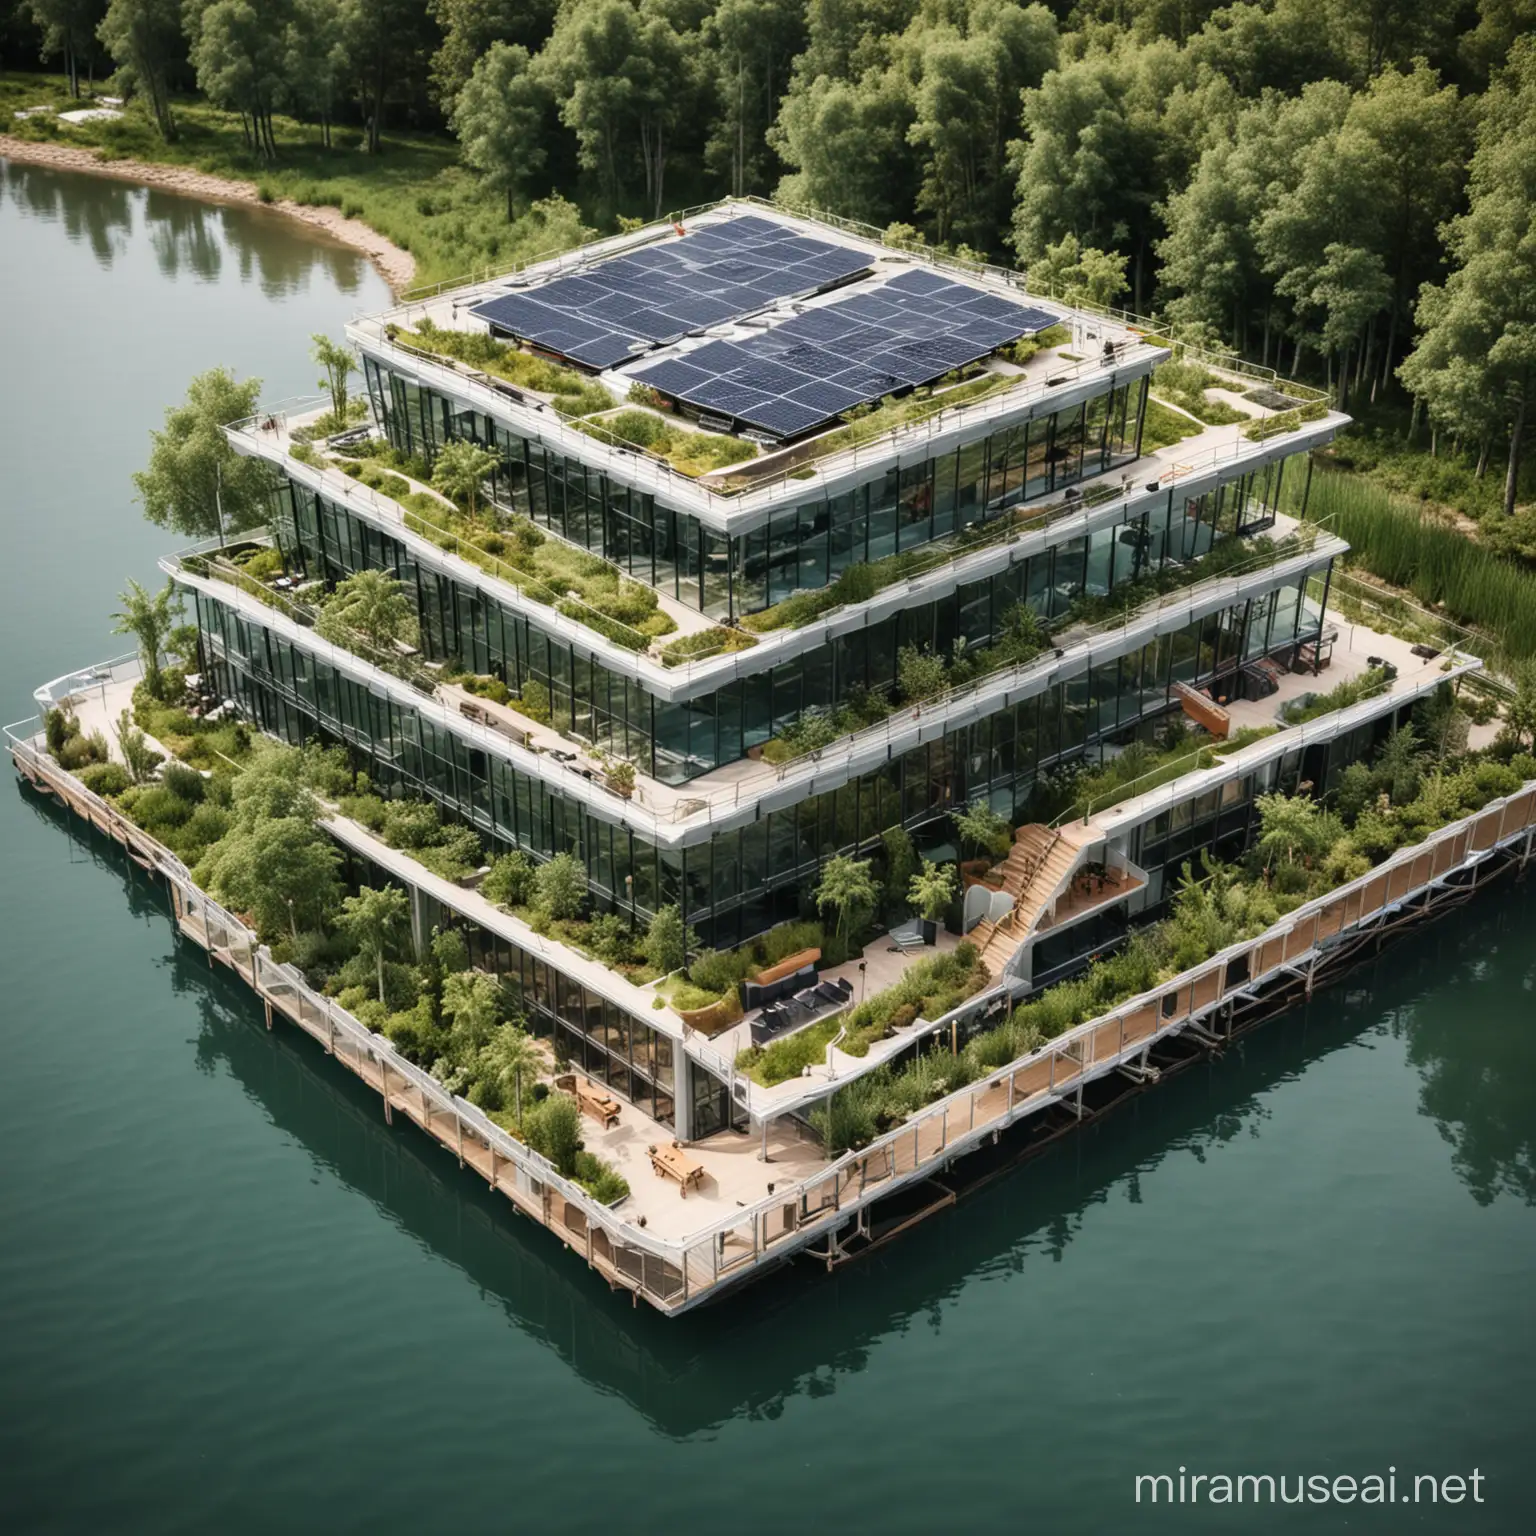 remote, 3 story, sustainability focused, roof solar integrated, green building with roof garden concept superstructure with eco-friendly materials for M.I.C.E events surrounded by part of a lake